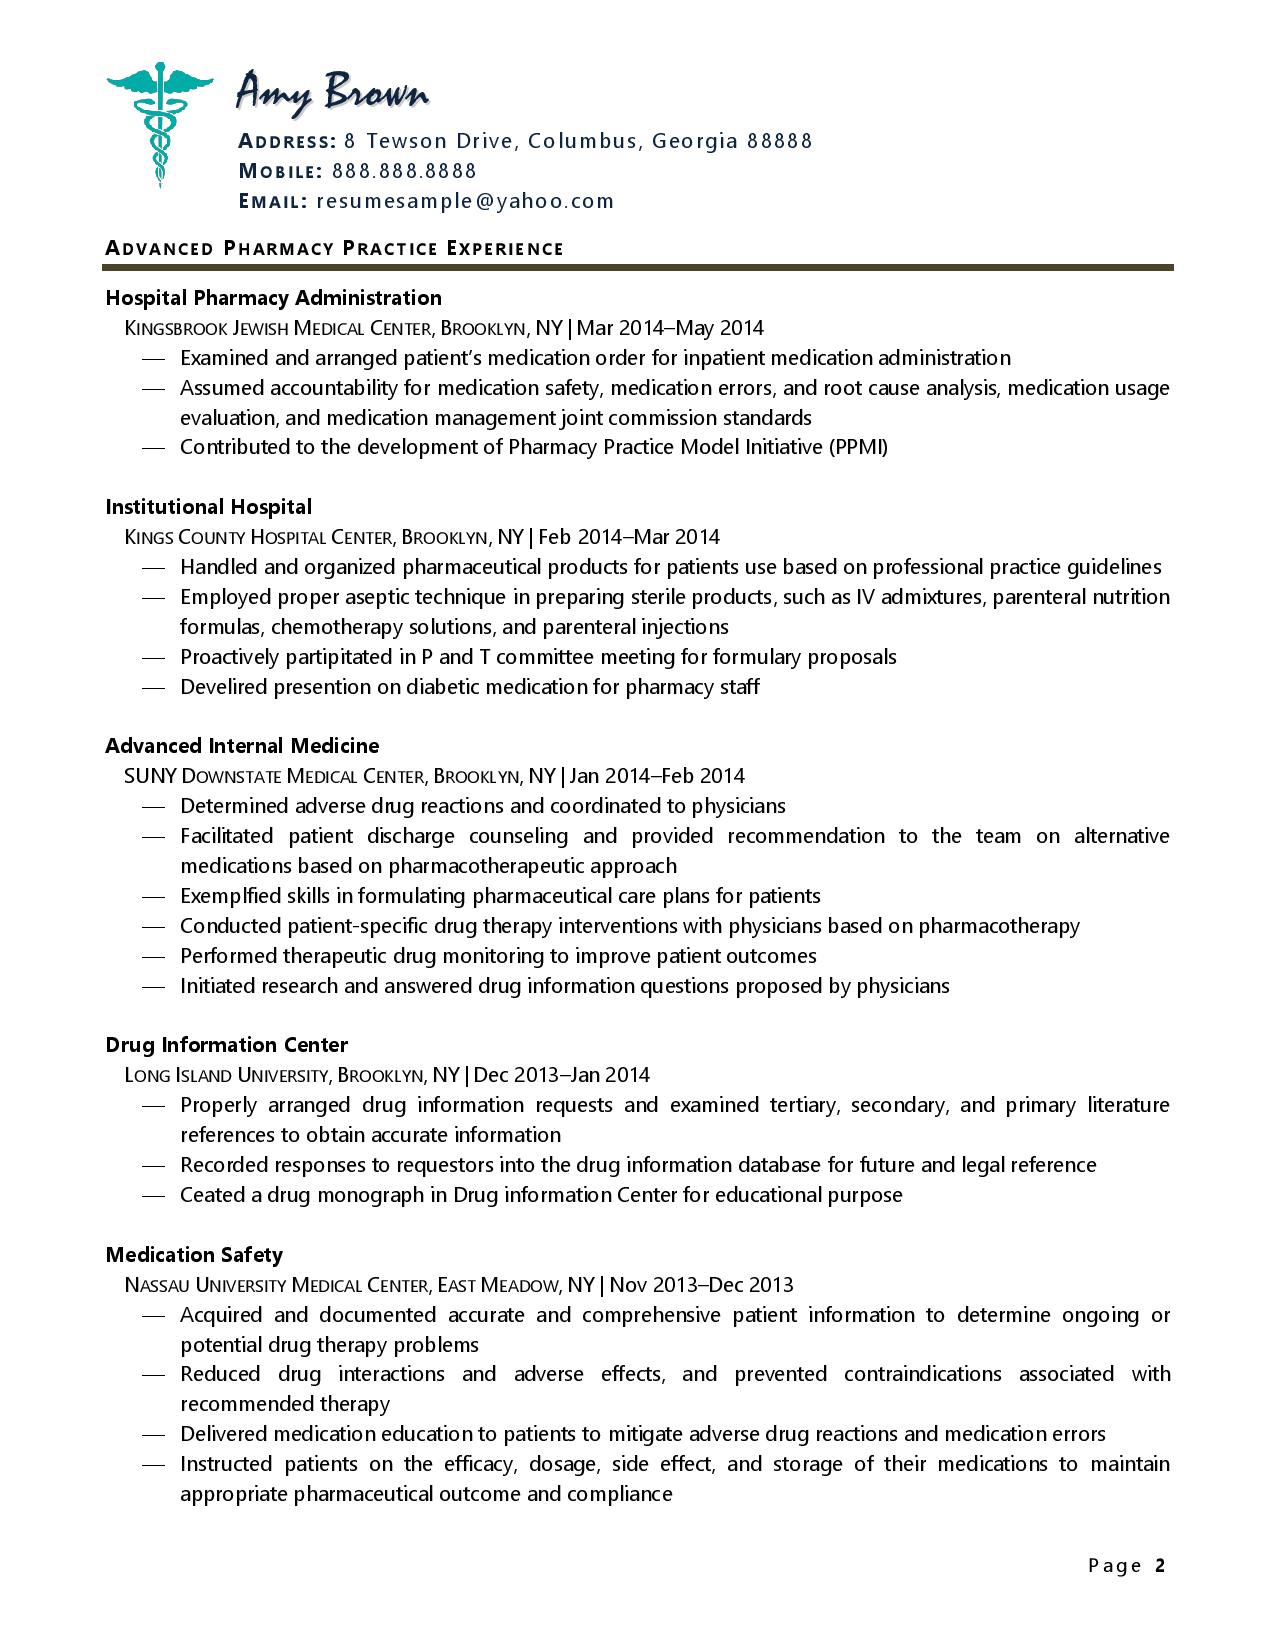 sample resume for pharmacist in the philippines